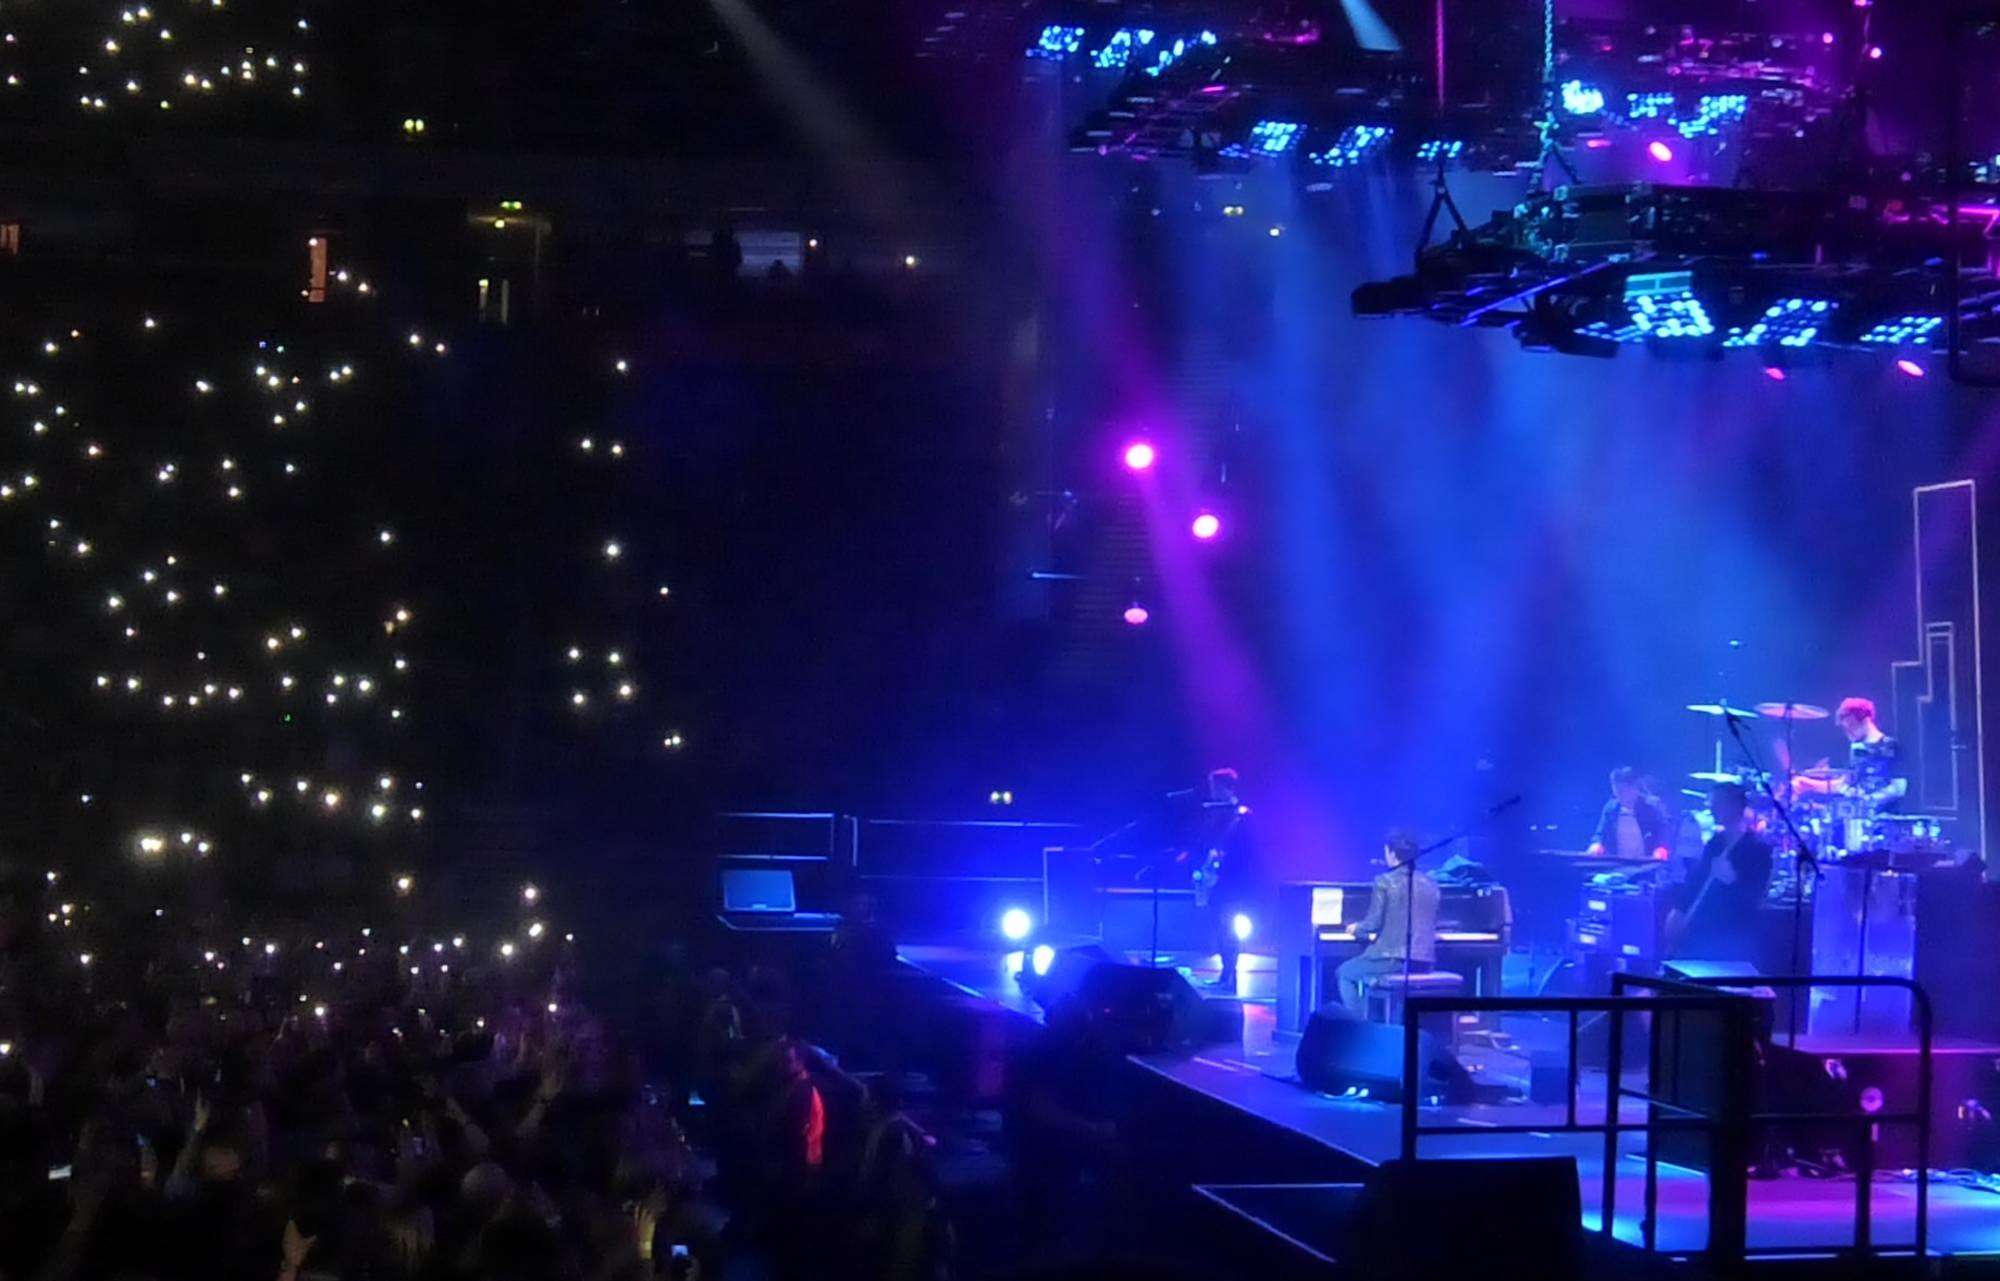 View of Stereophonics at Manchester Arena from Seat Block 115